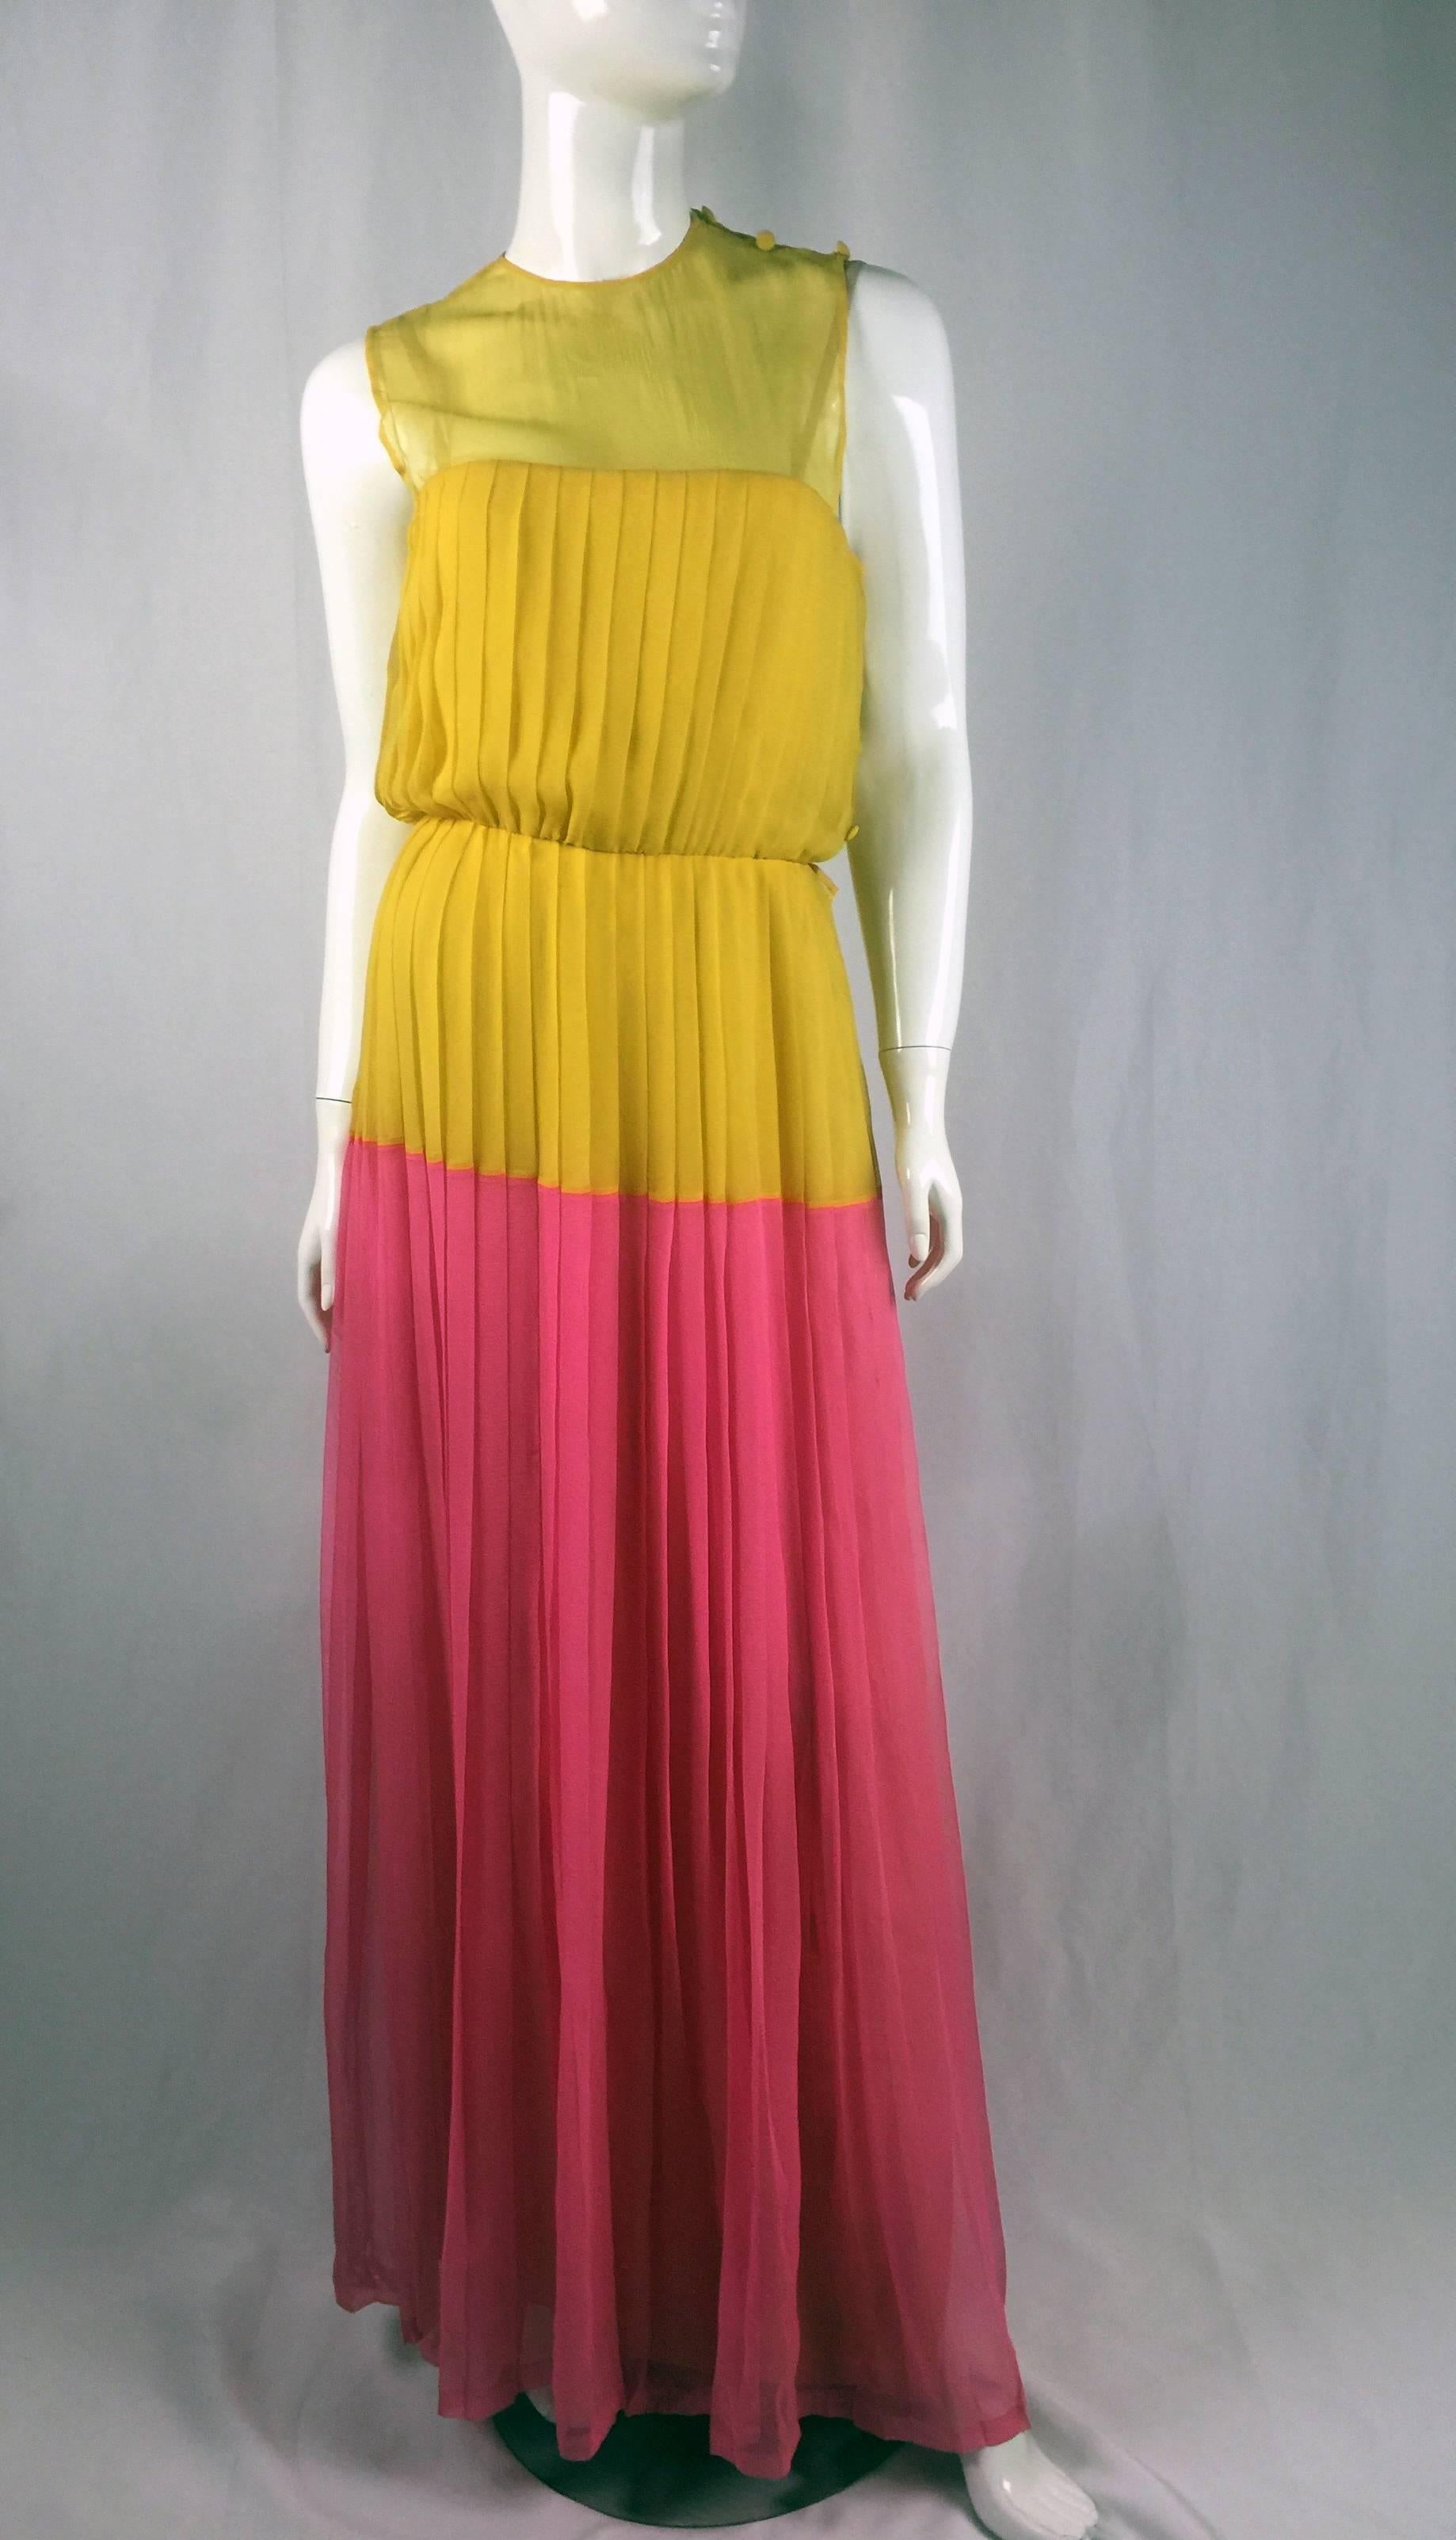 This fabulous 1980s Nina Ricci Silk Chiffon Couture gown is a delicate specialty, Hand Sewn pleating on this gown that cascades to the grown with a fabulous color blocking from yellow to a bright pink. 

The gown also comes with a beautiful yellow